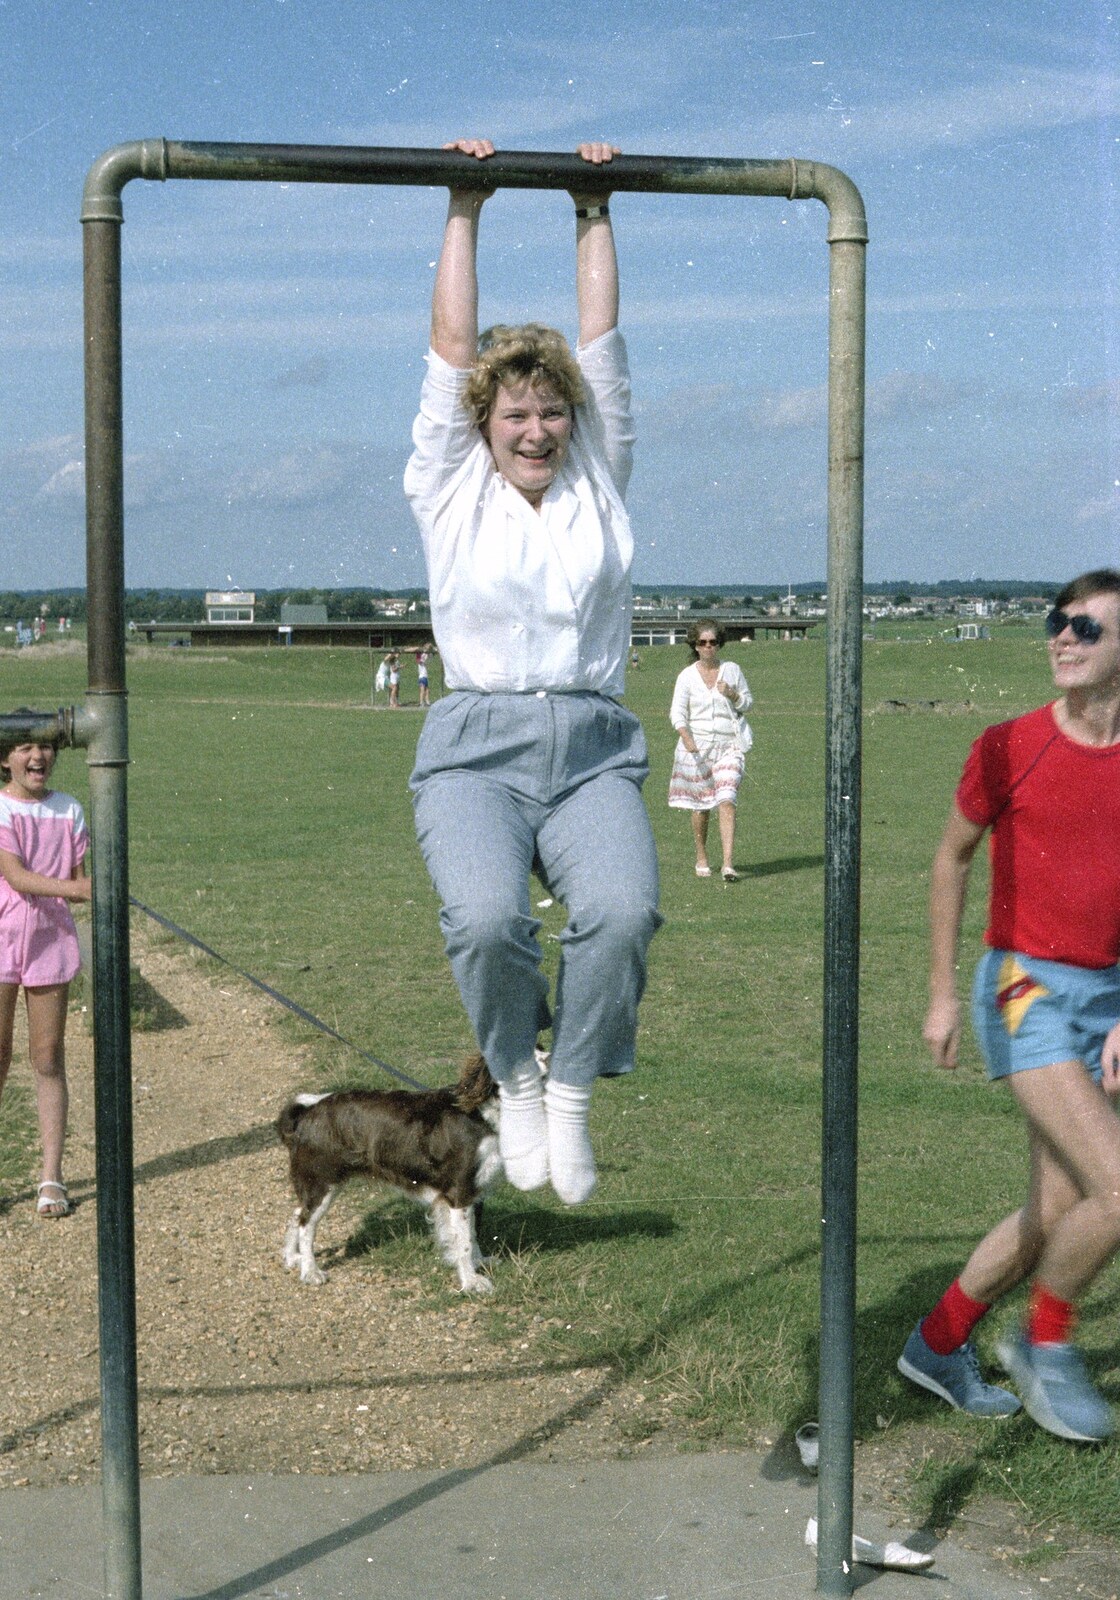 Anna swings from the monkey bars from Brockenhurst College Exams and Miscellany, Barton on Sea, Hampshire - 10th June 1985